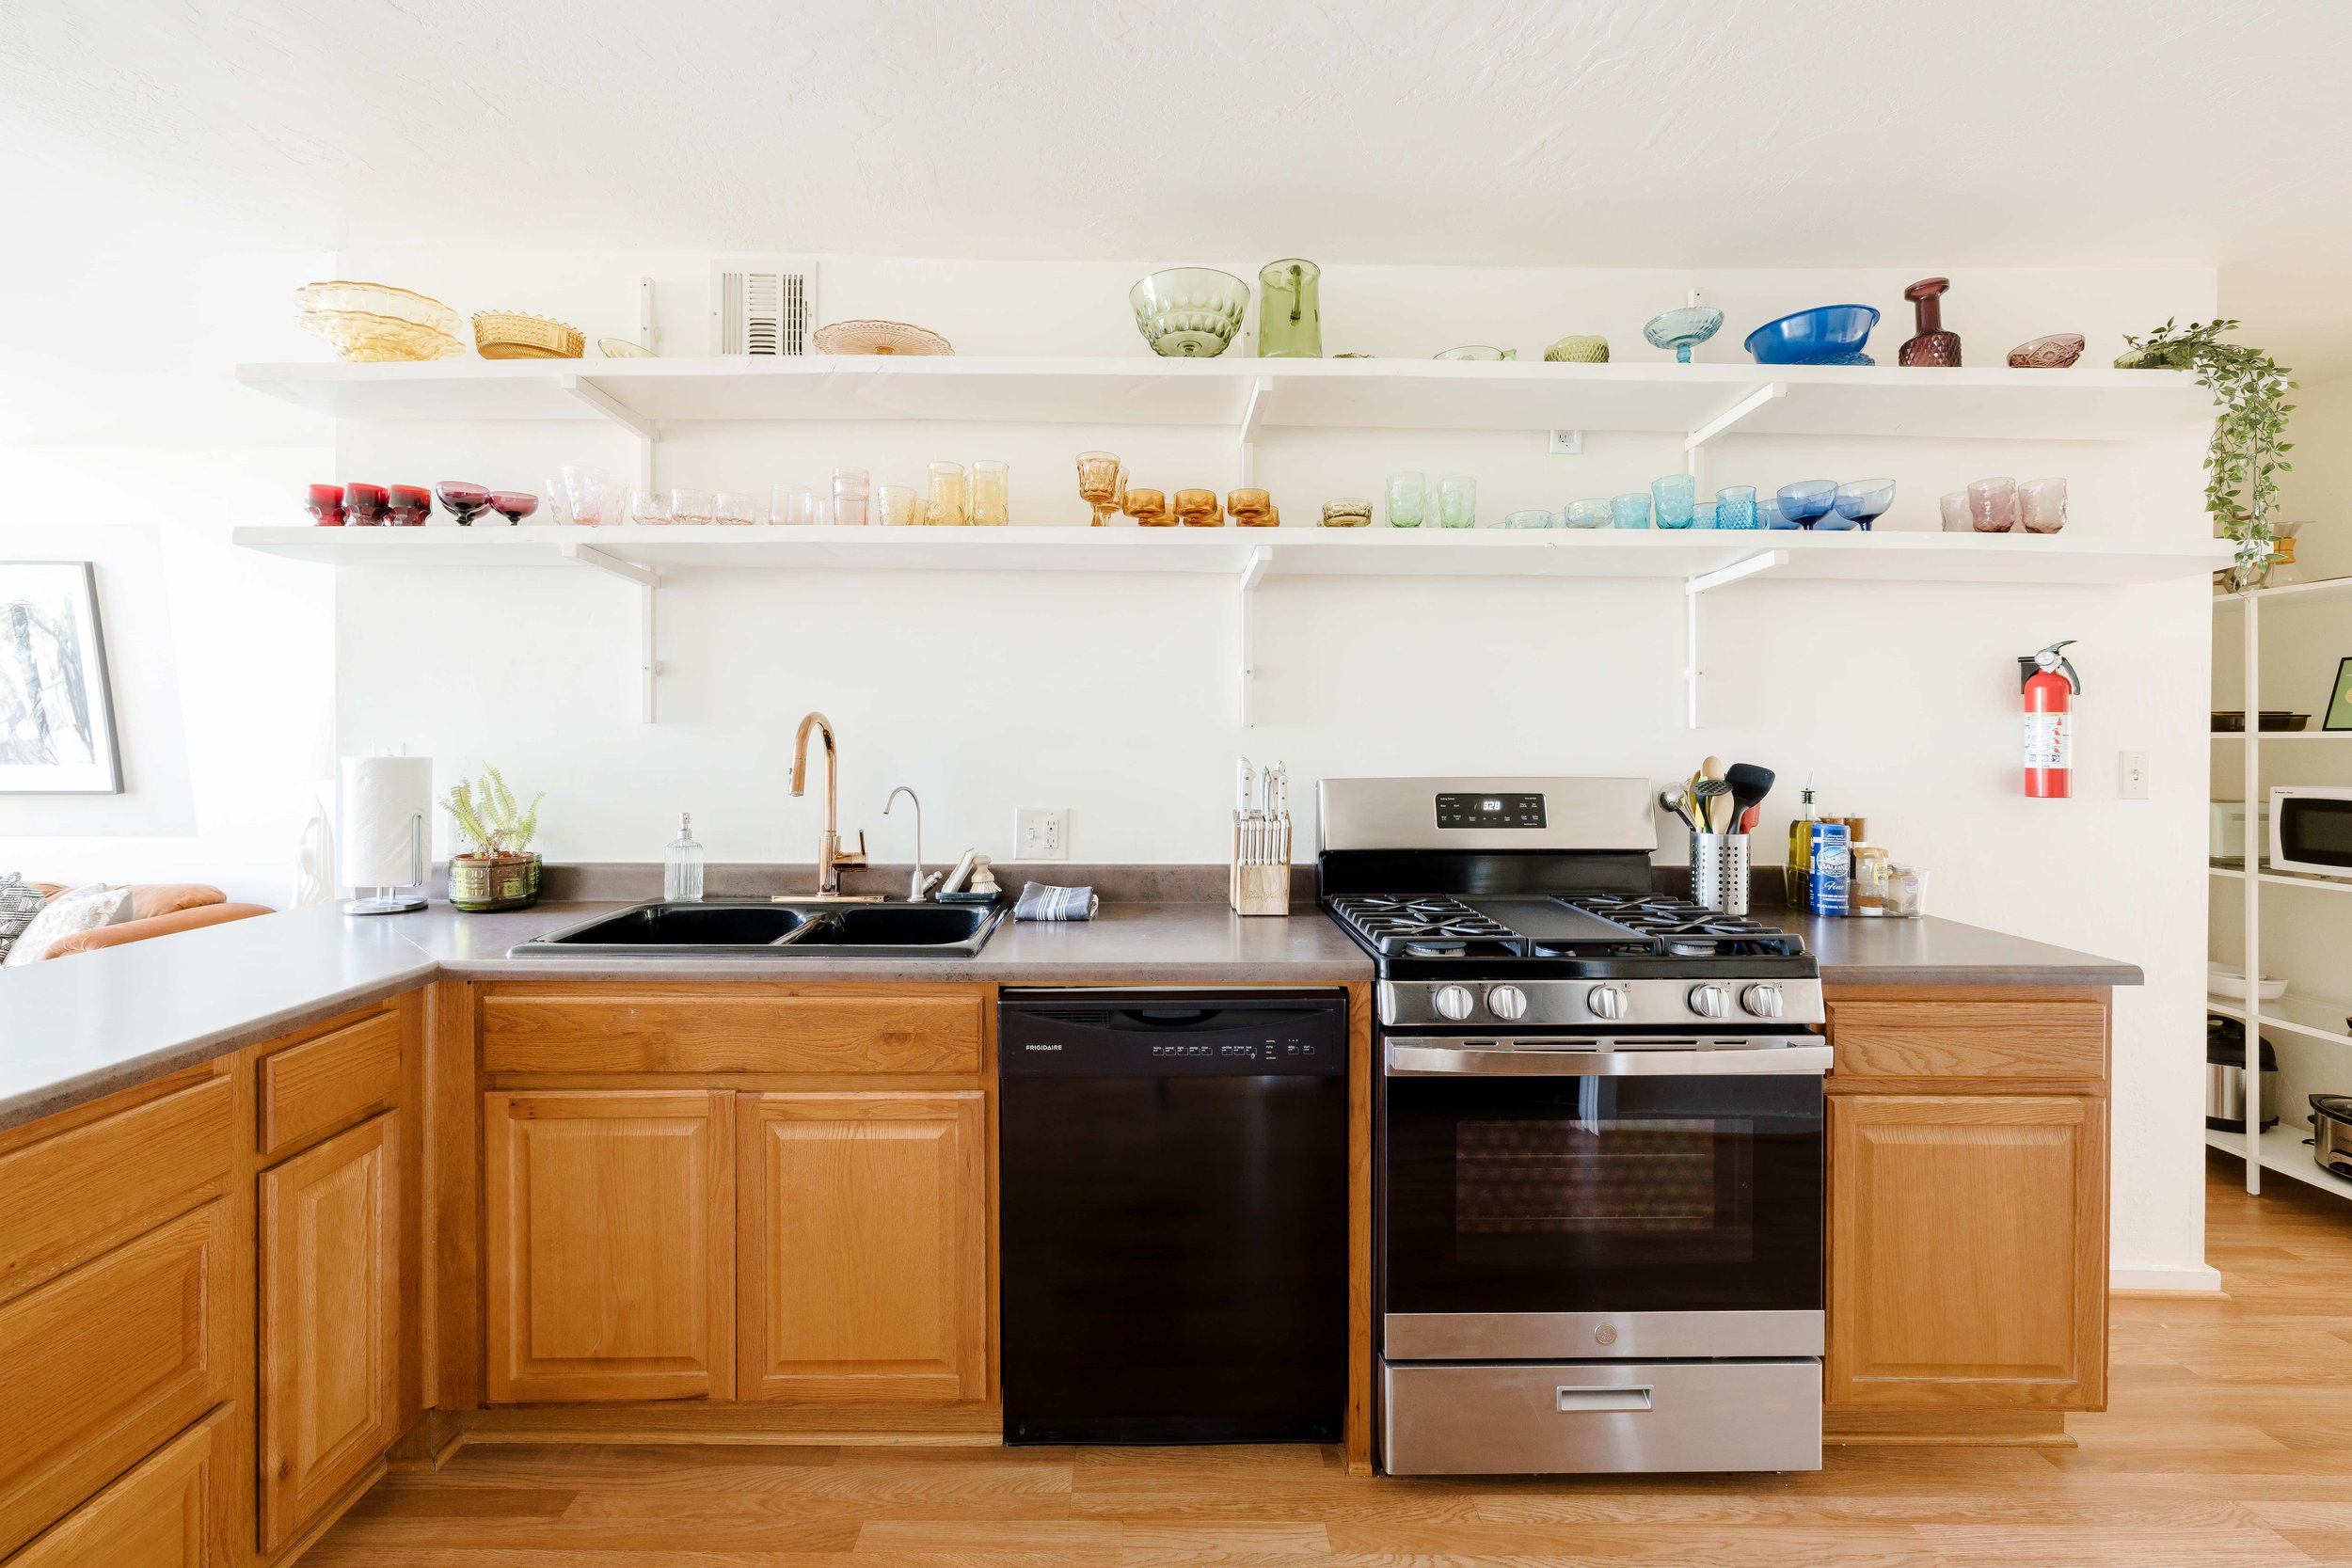 The kitchen features color coded kitchenware displayed on open shelves